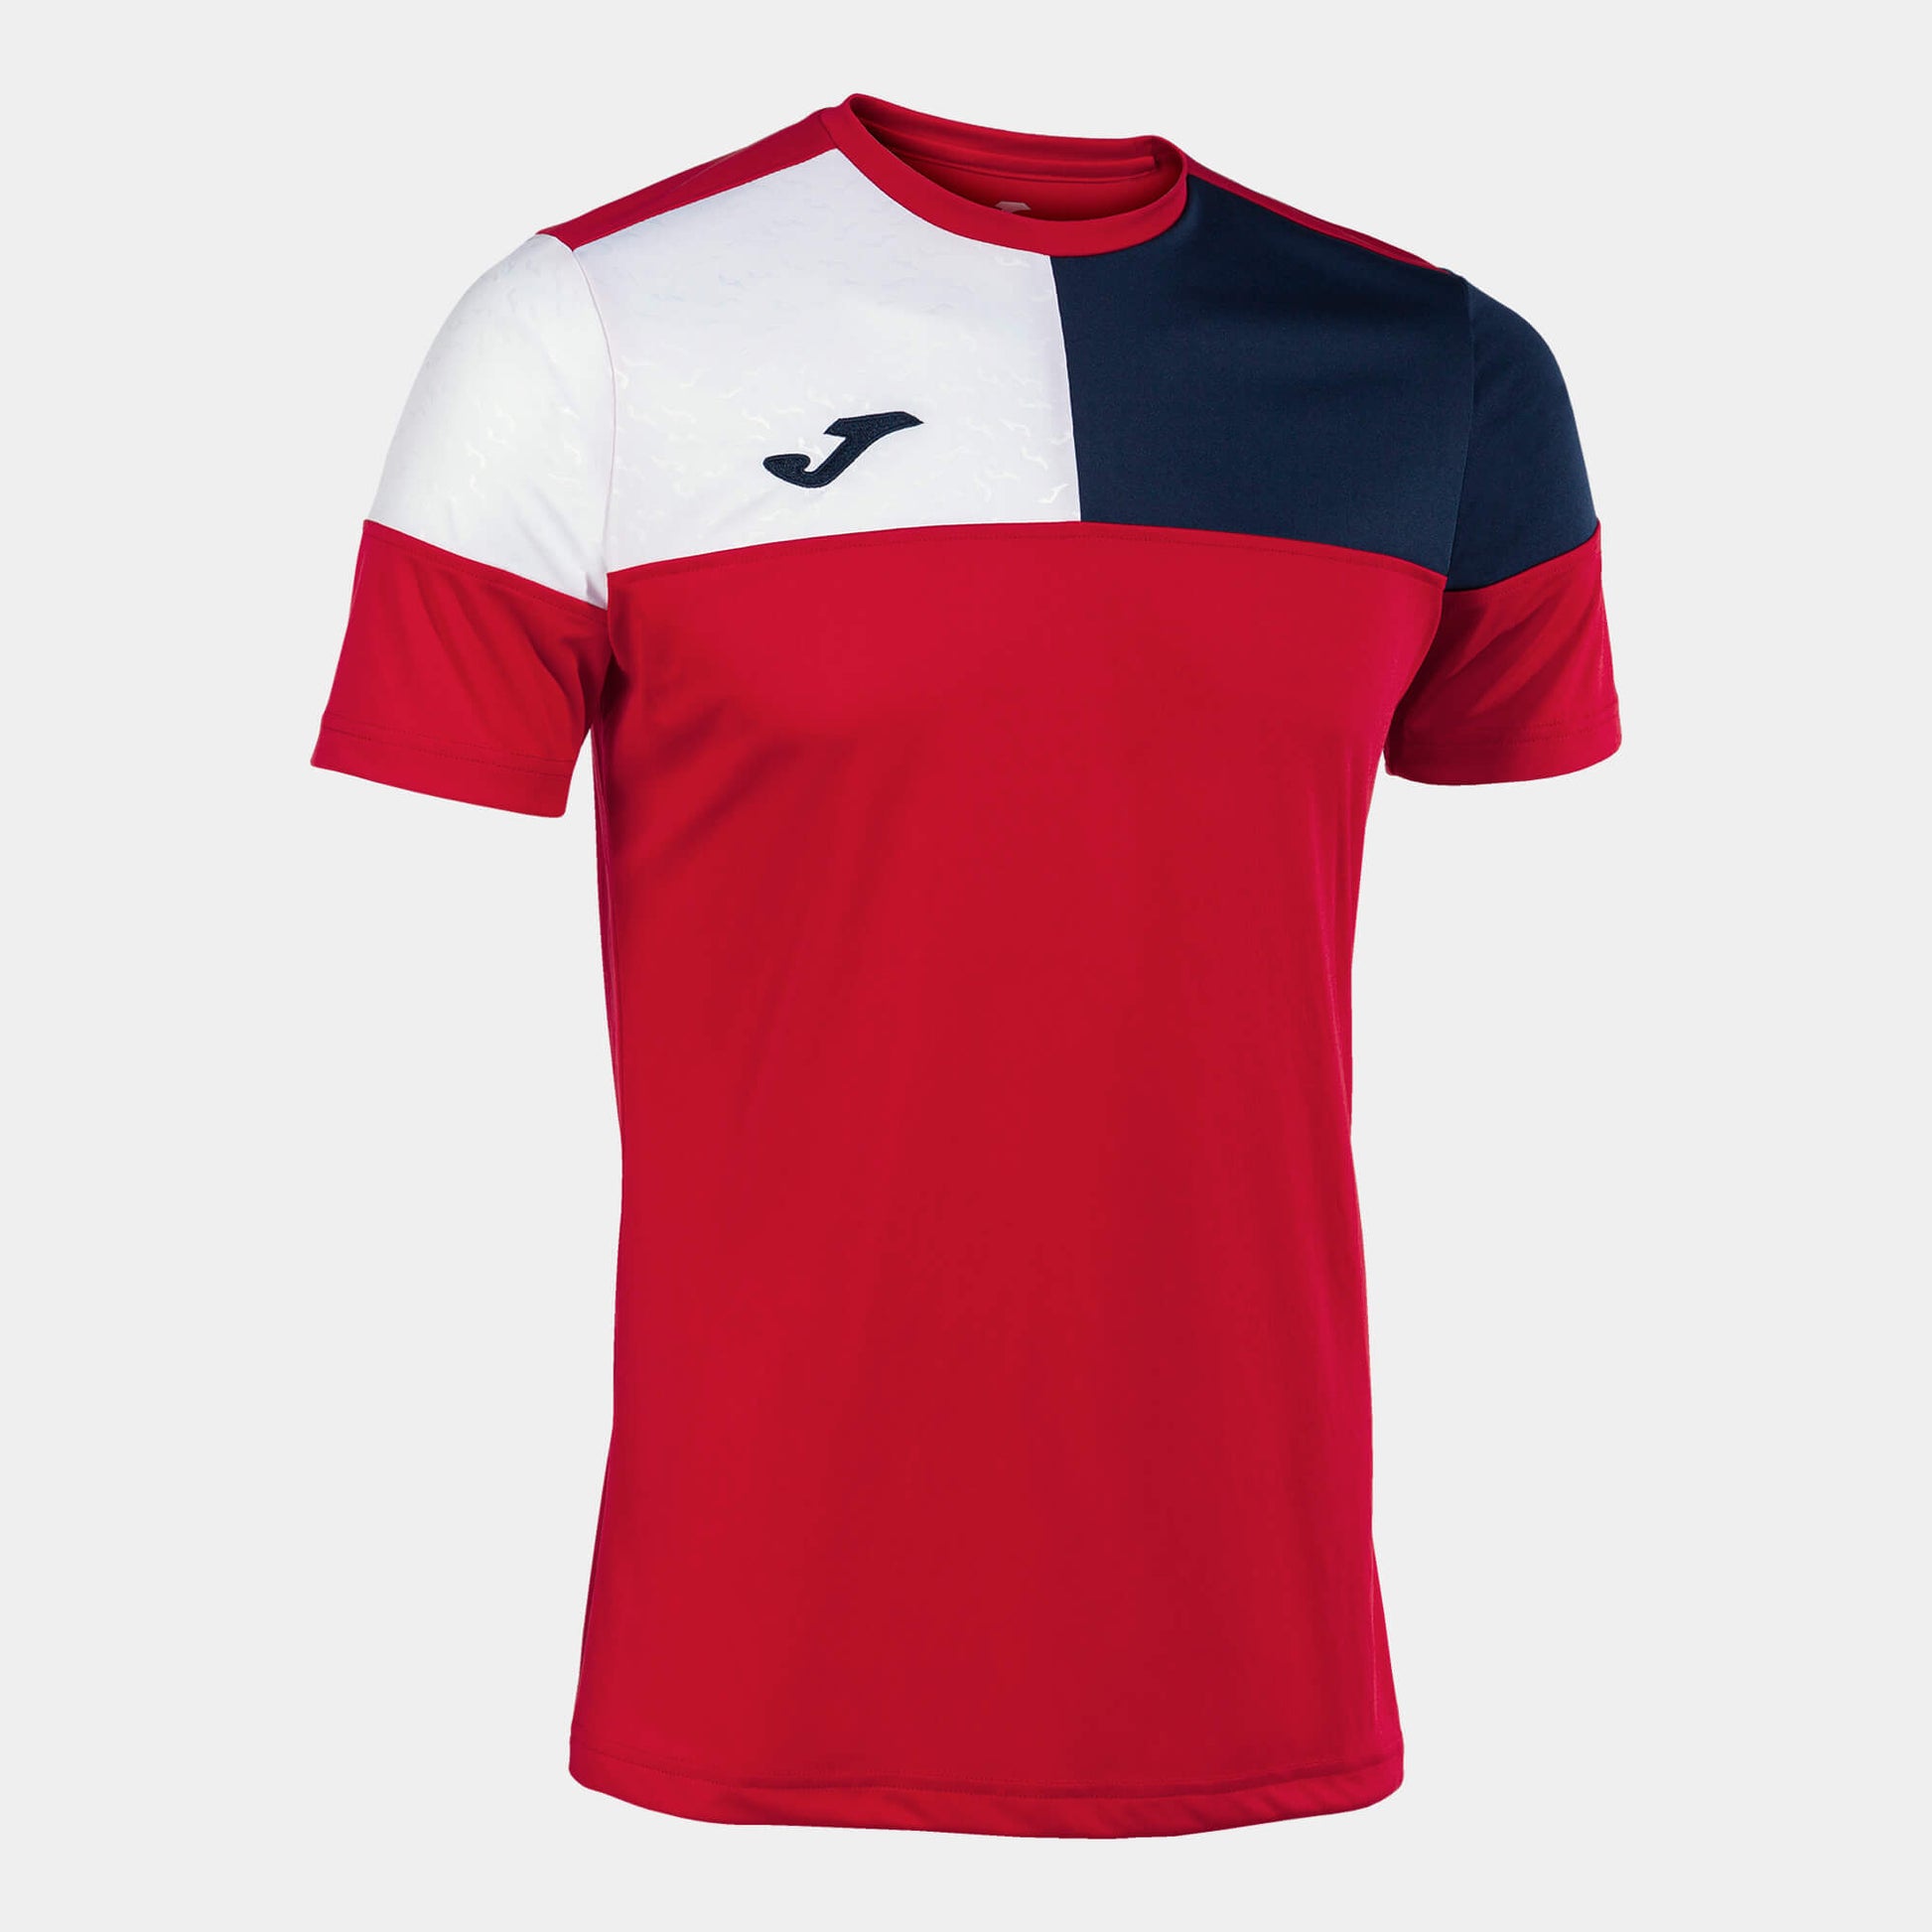 Joma Crew V Jersey Red Navy White (Front)